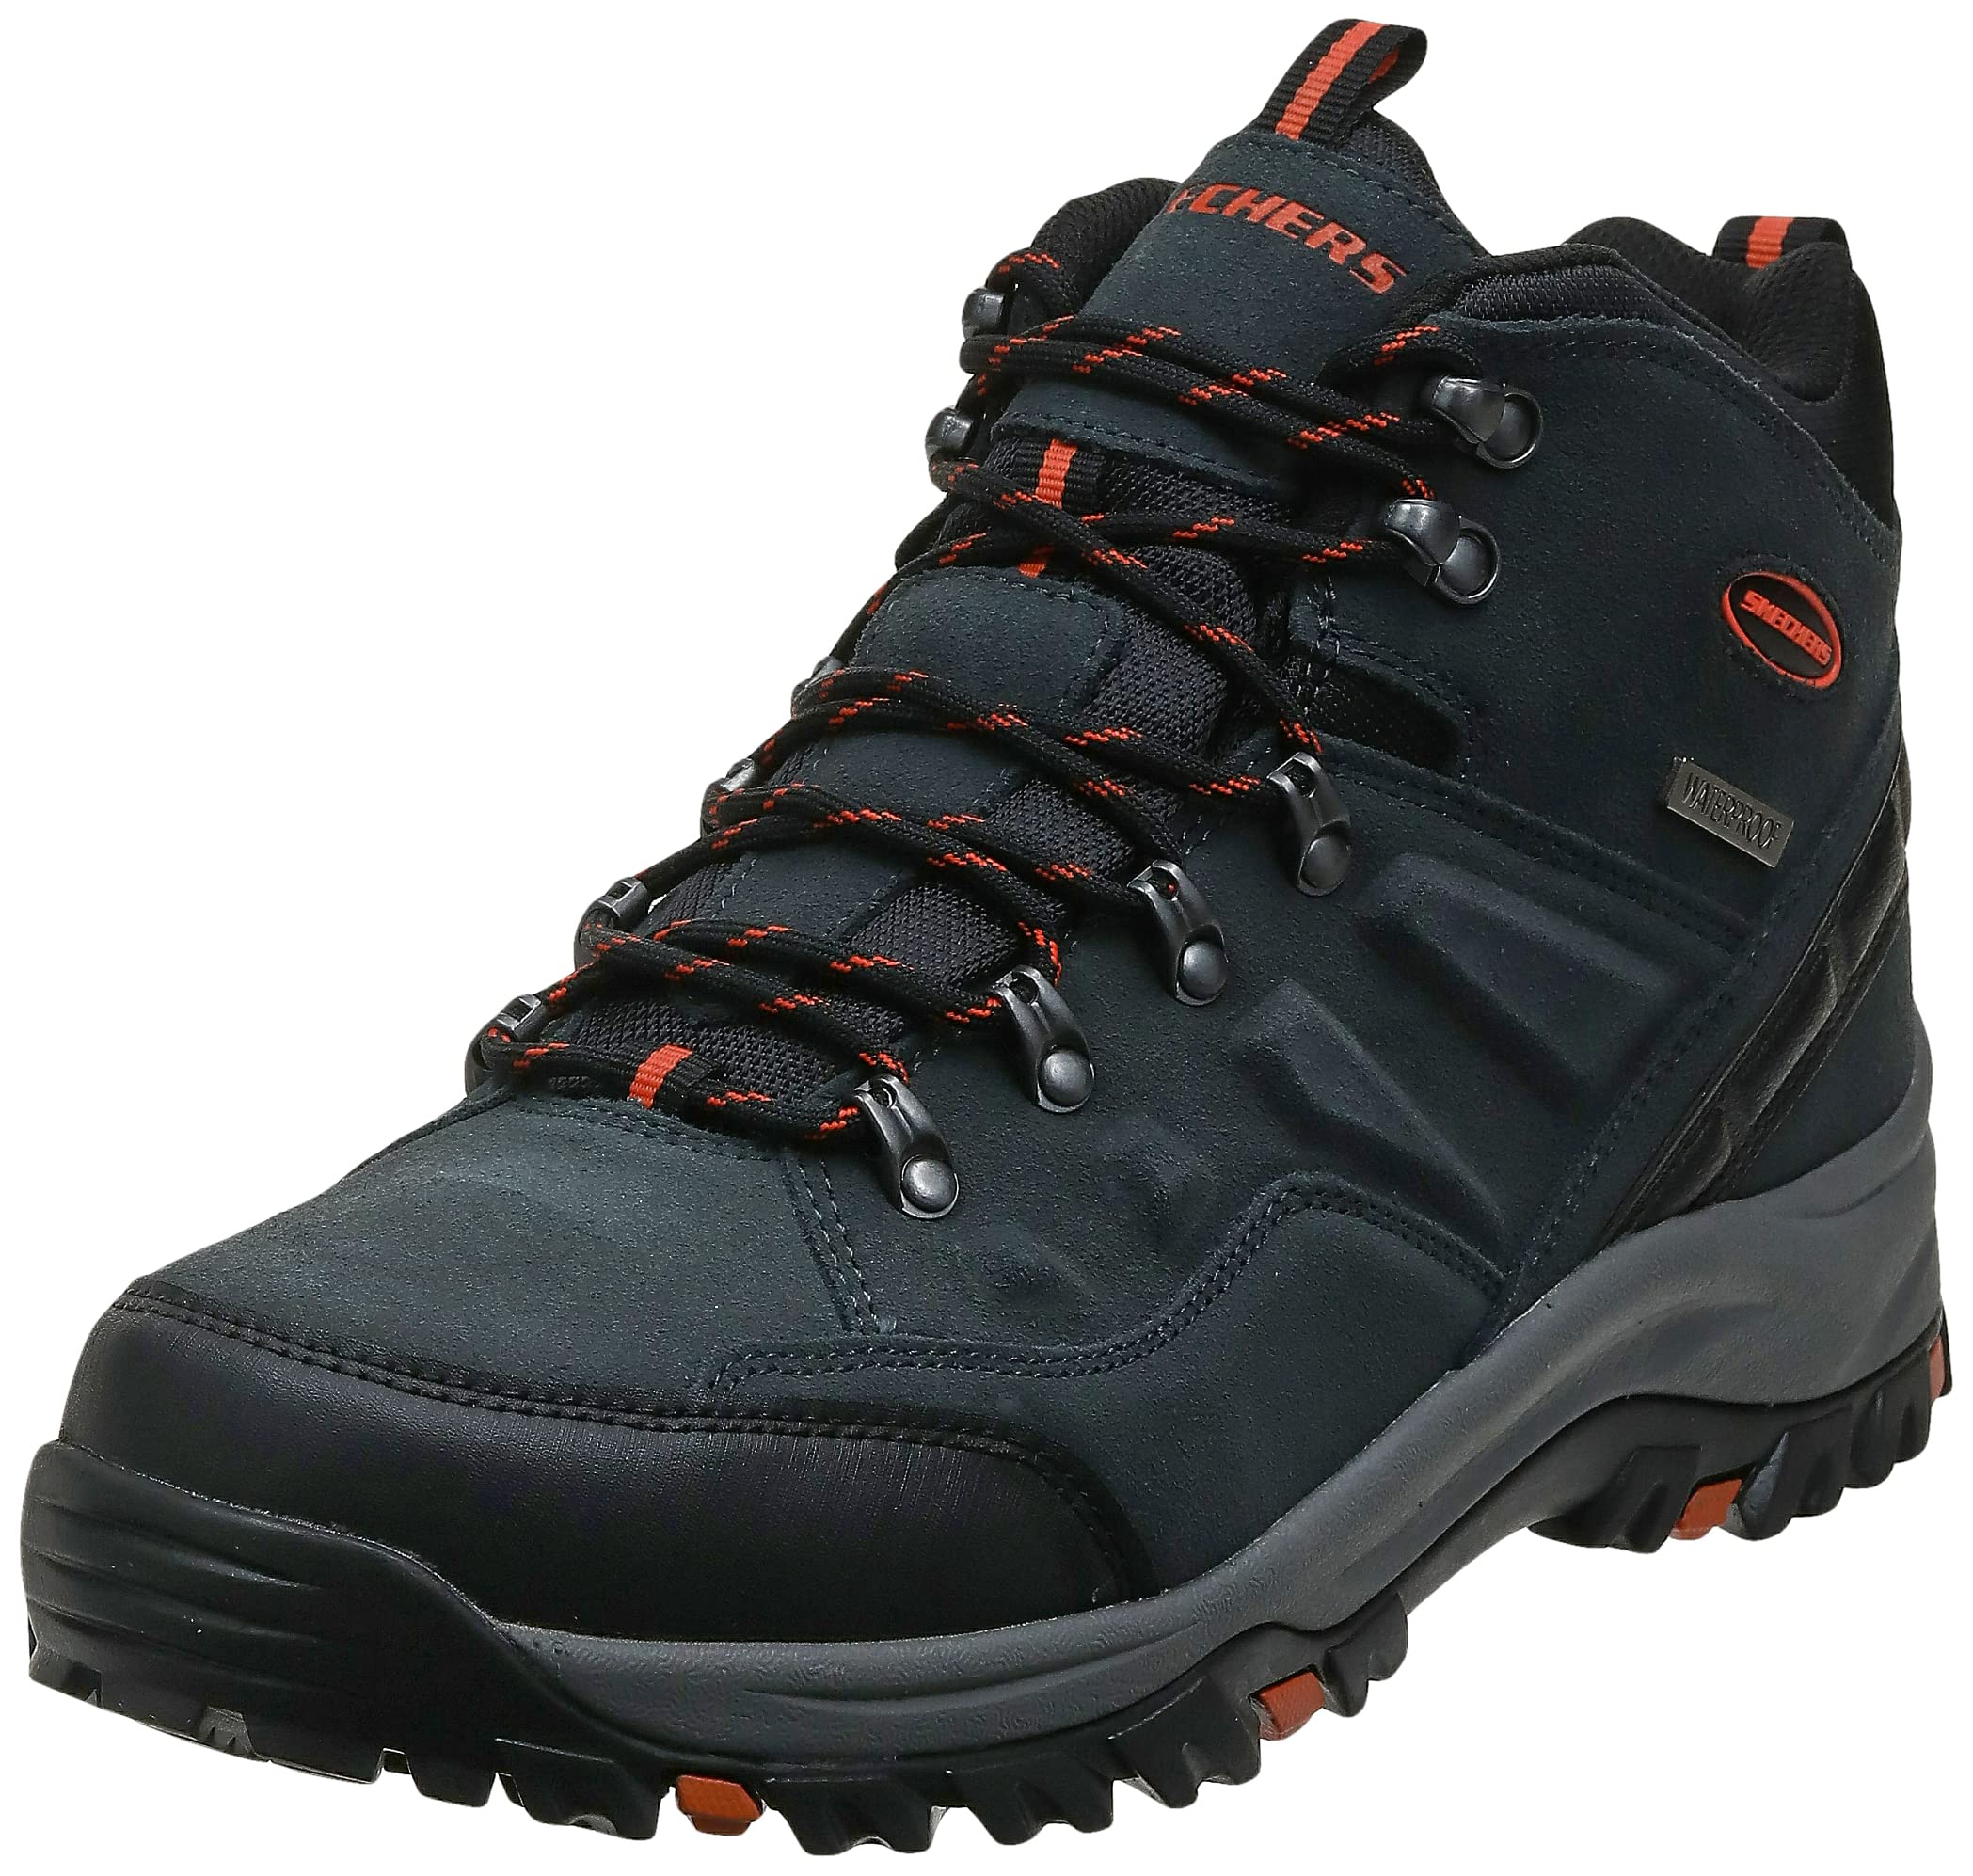 Skechers Men's Relment-Pelmo Hiking Boot, List Price is $80, Now Only $39.99